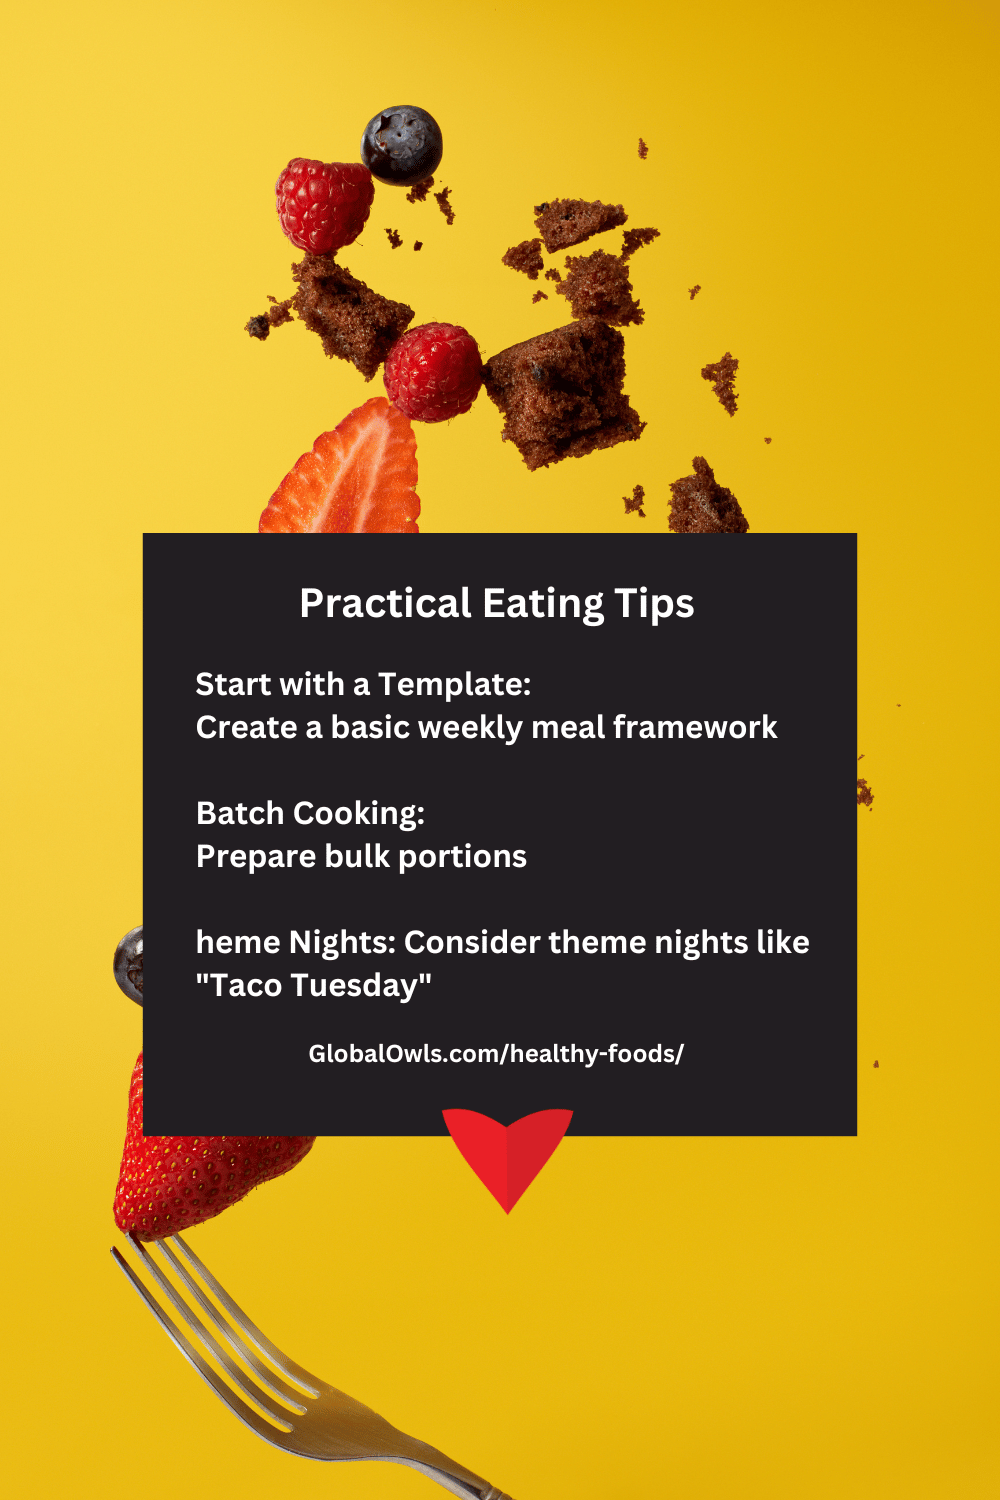 Practical Eating Tips